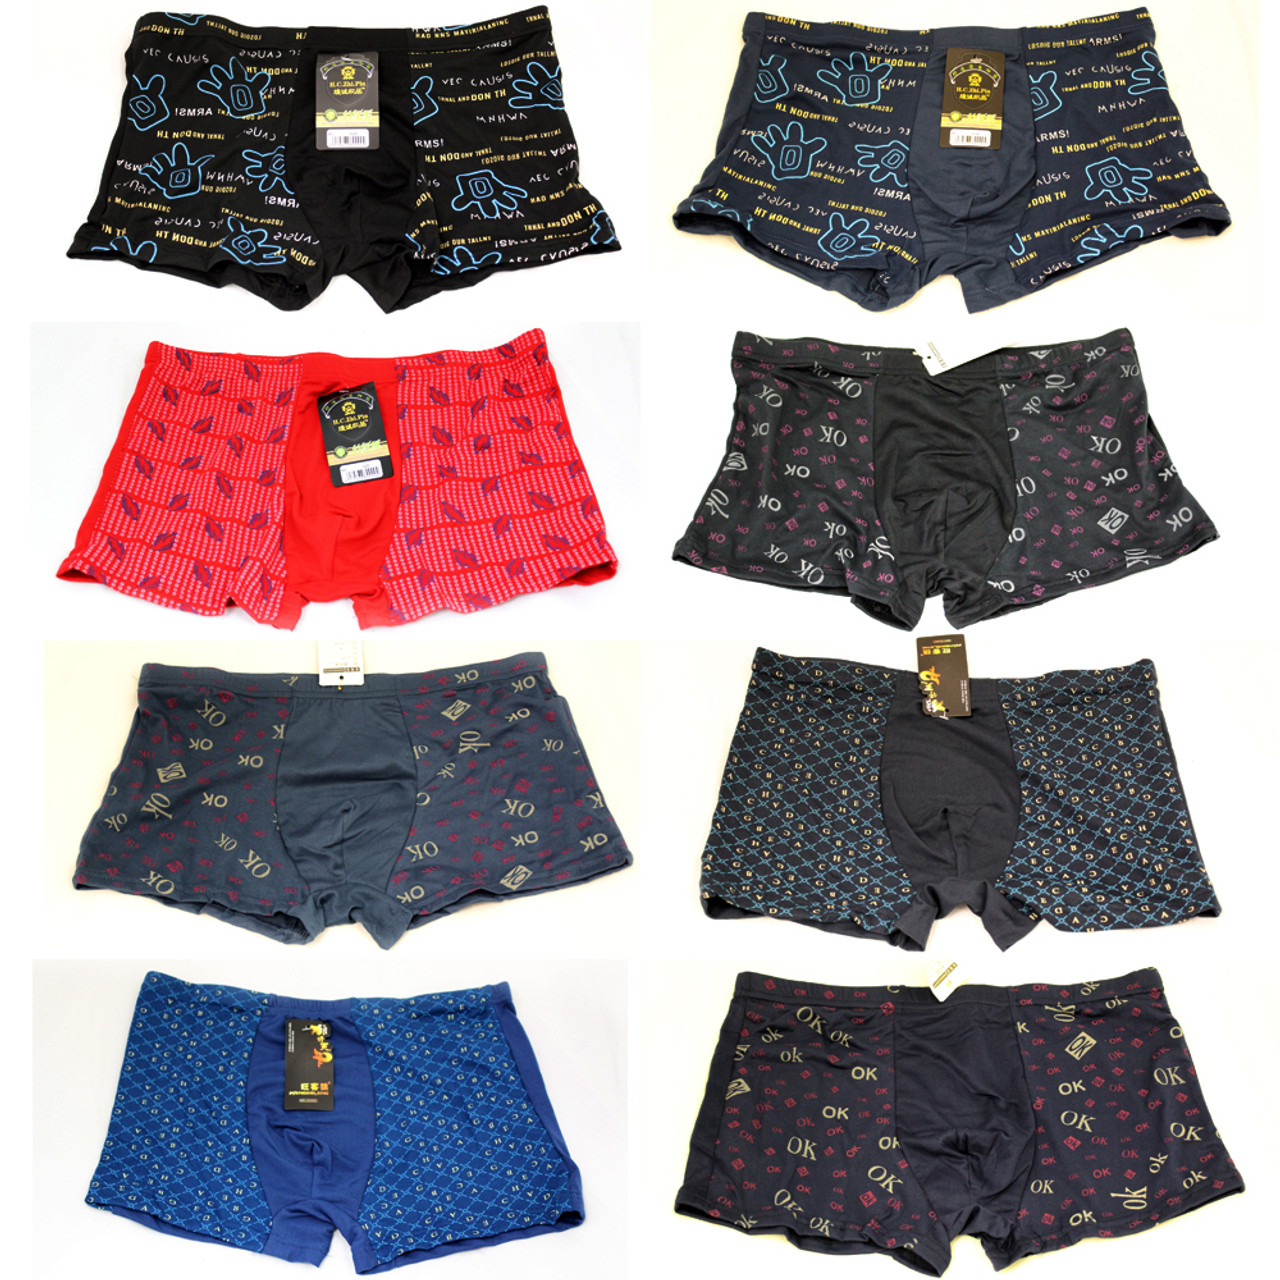 108) Assorted Sizes and Styles Wholesale Mixed Lot Men Underwears